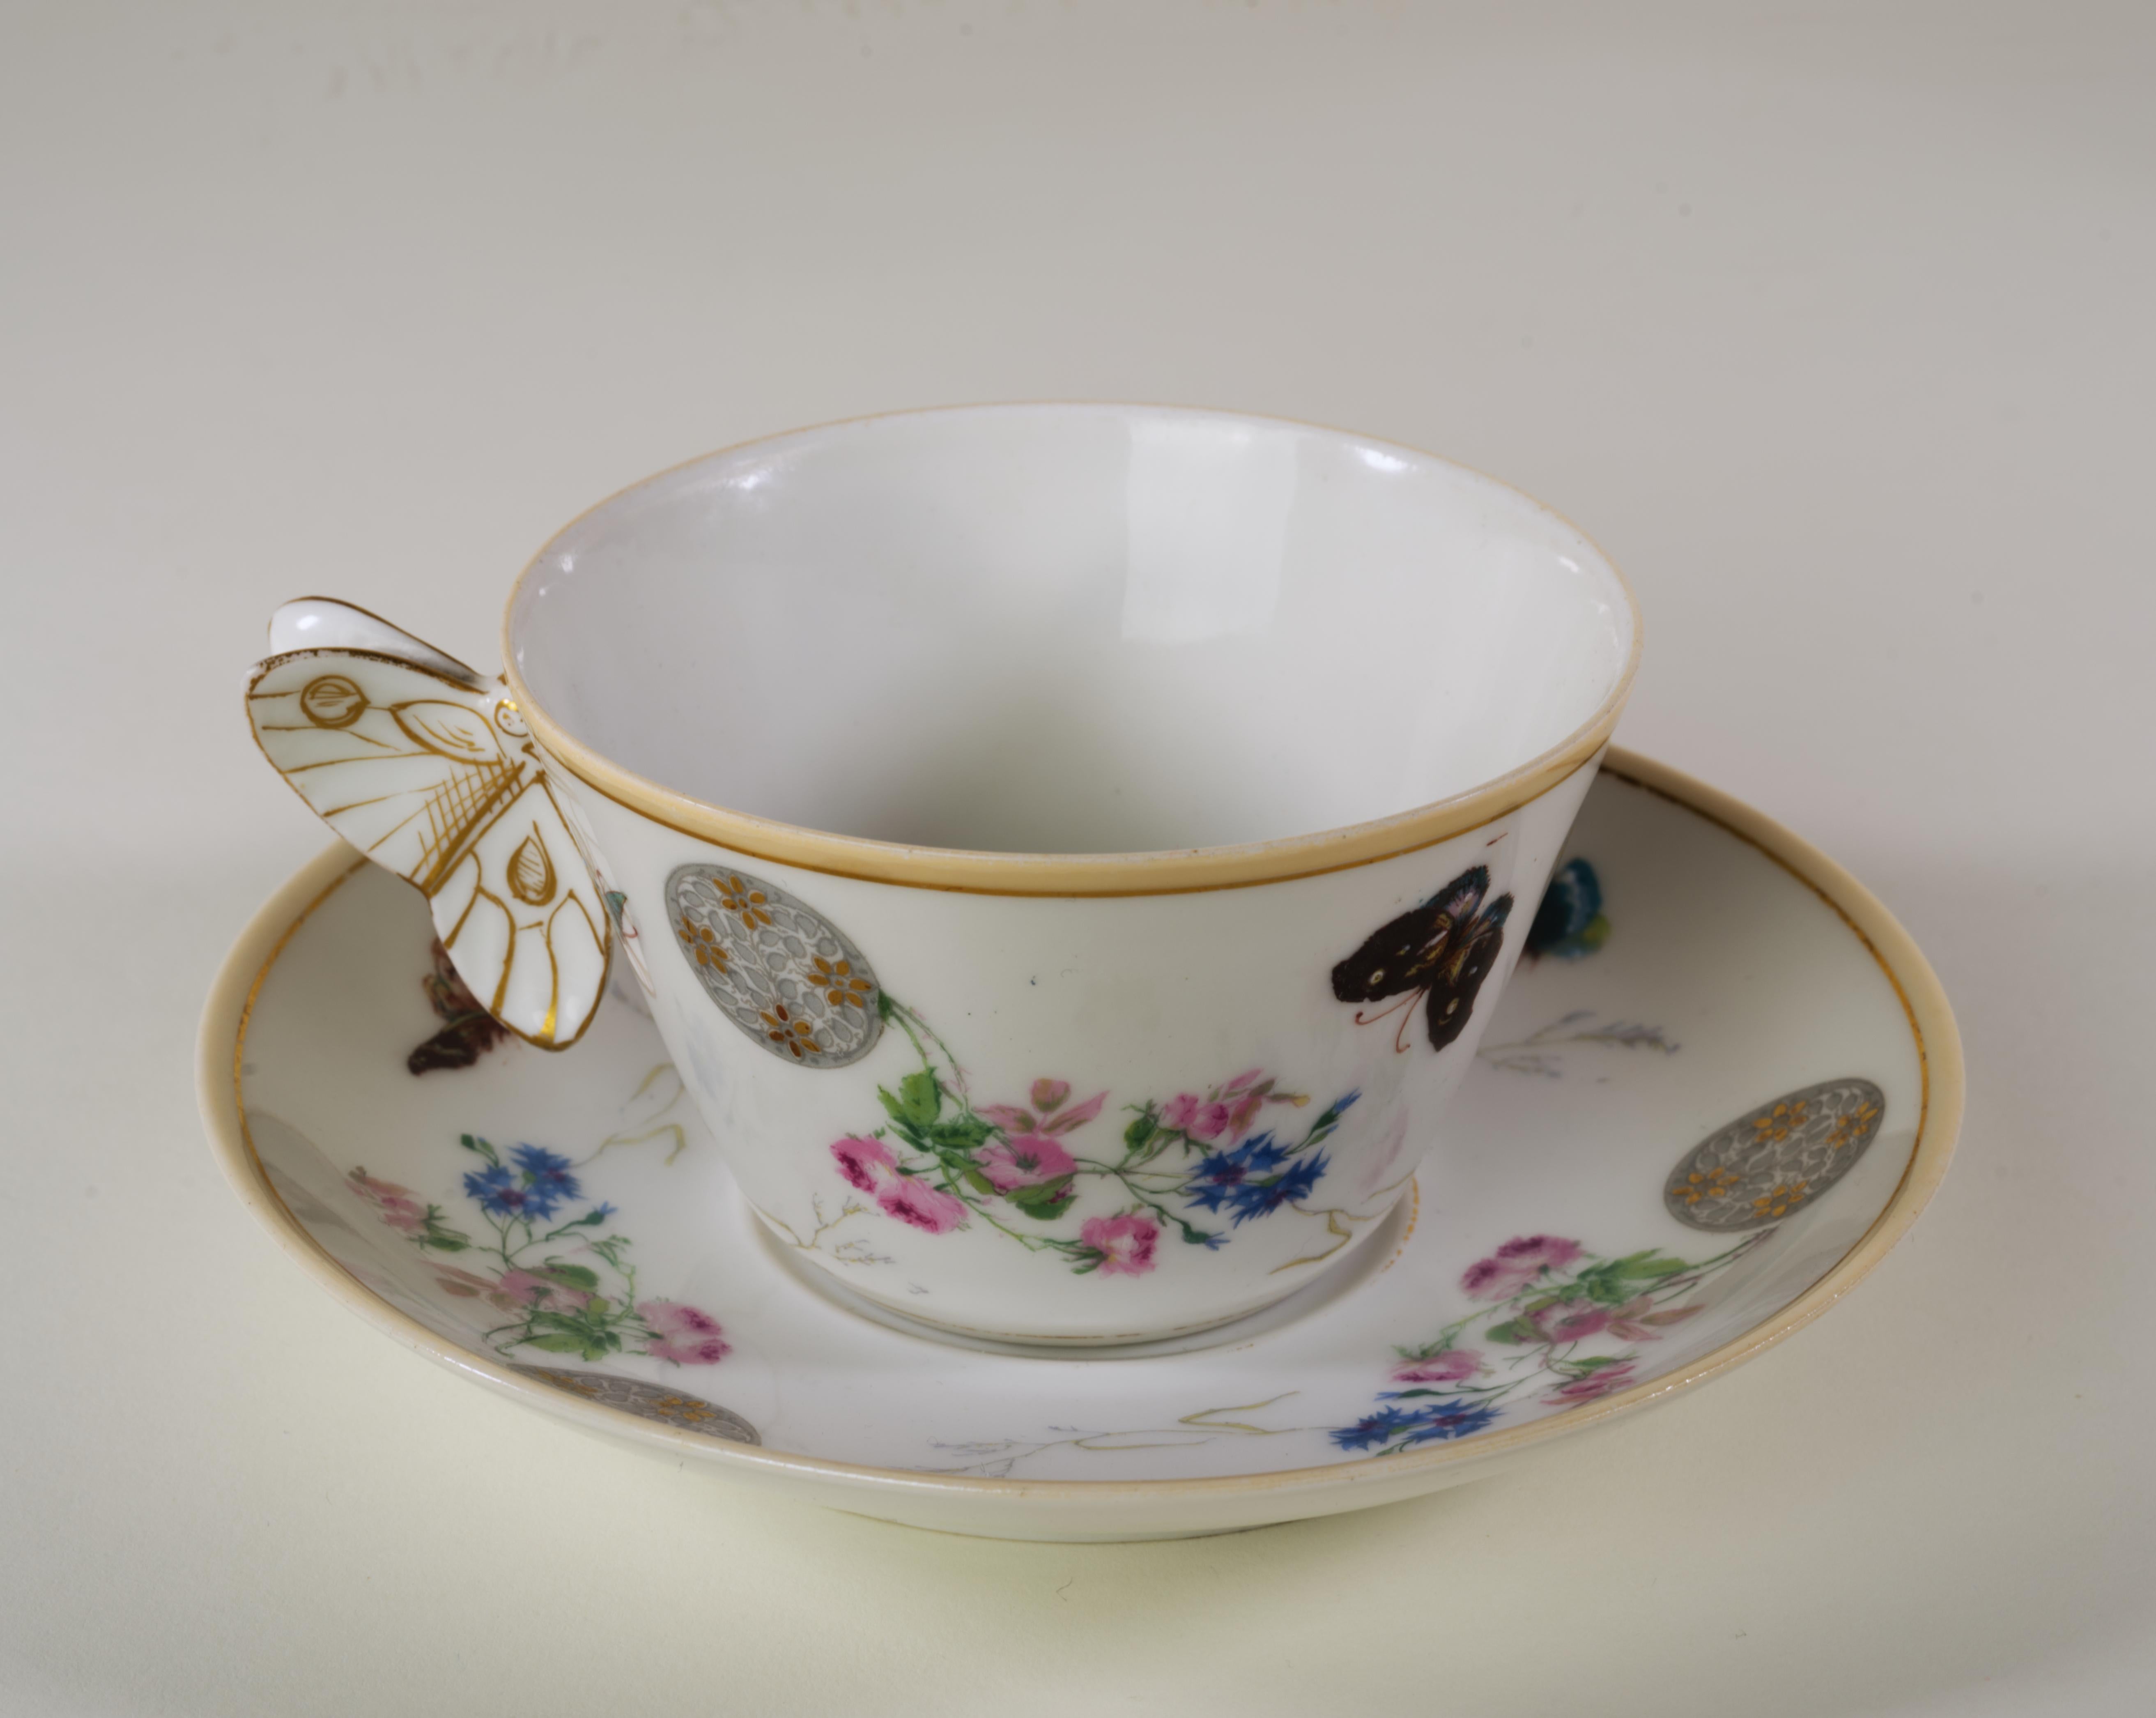 Hand-Crafted Haviland Limoges Butterfly Handled Cup and saucer set, 1879-1889, Aesthetic  For Sale